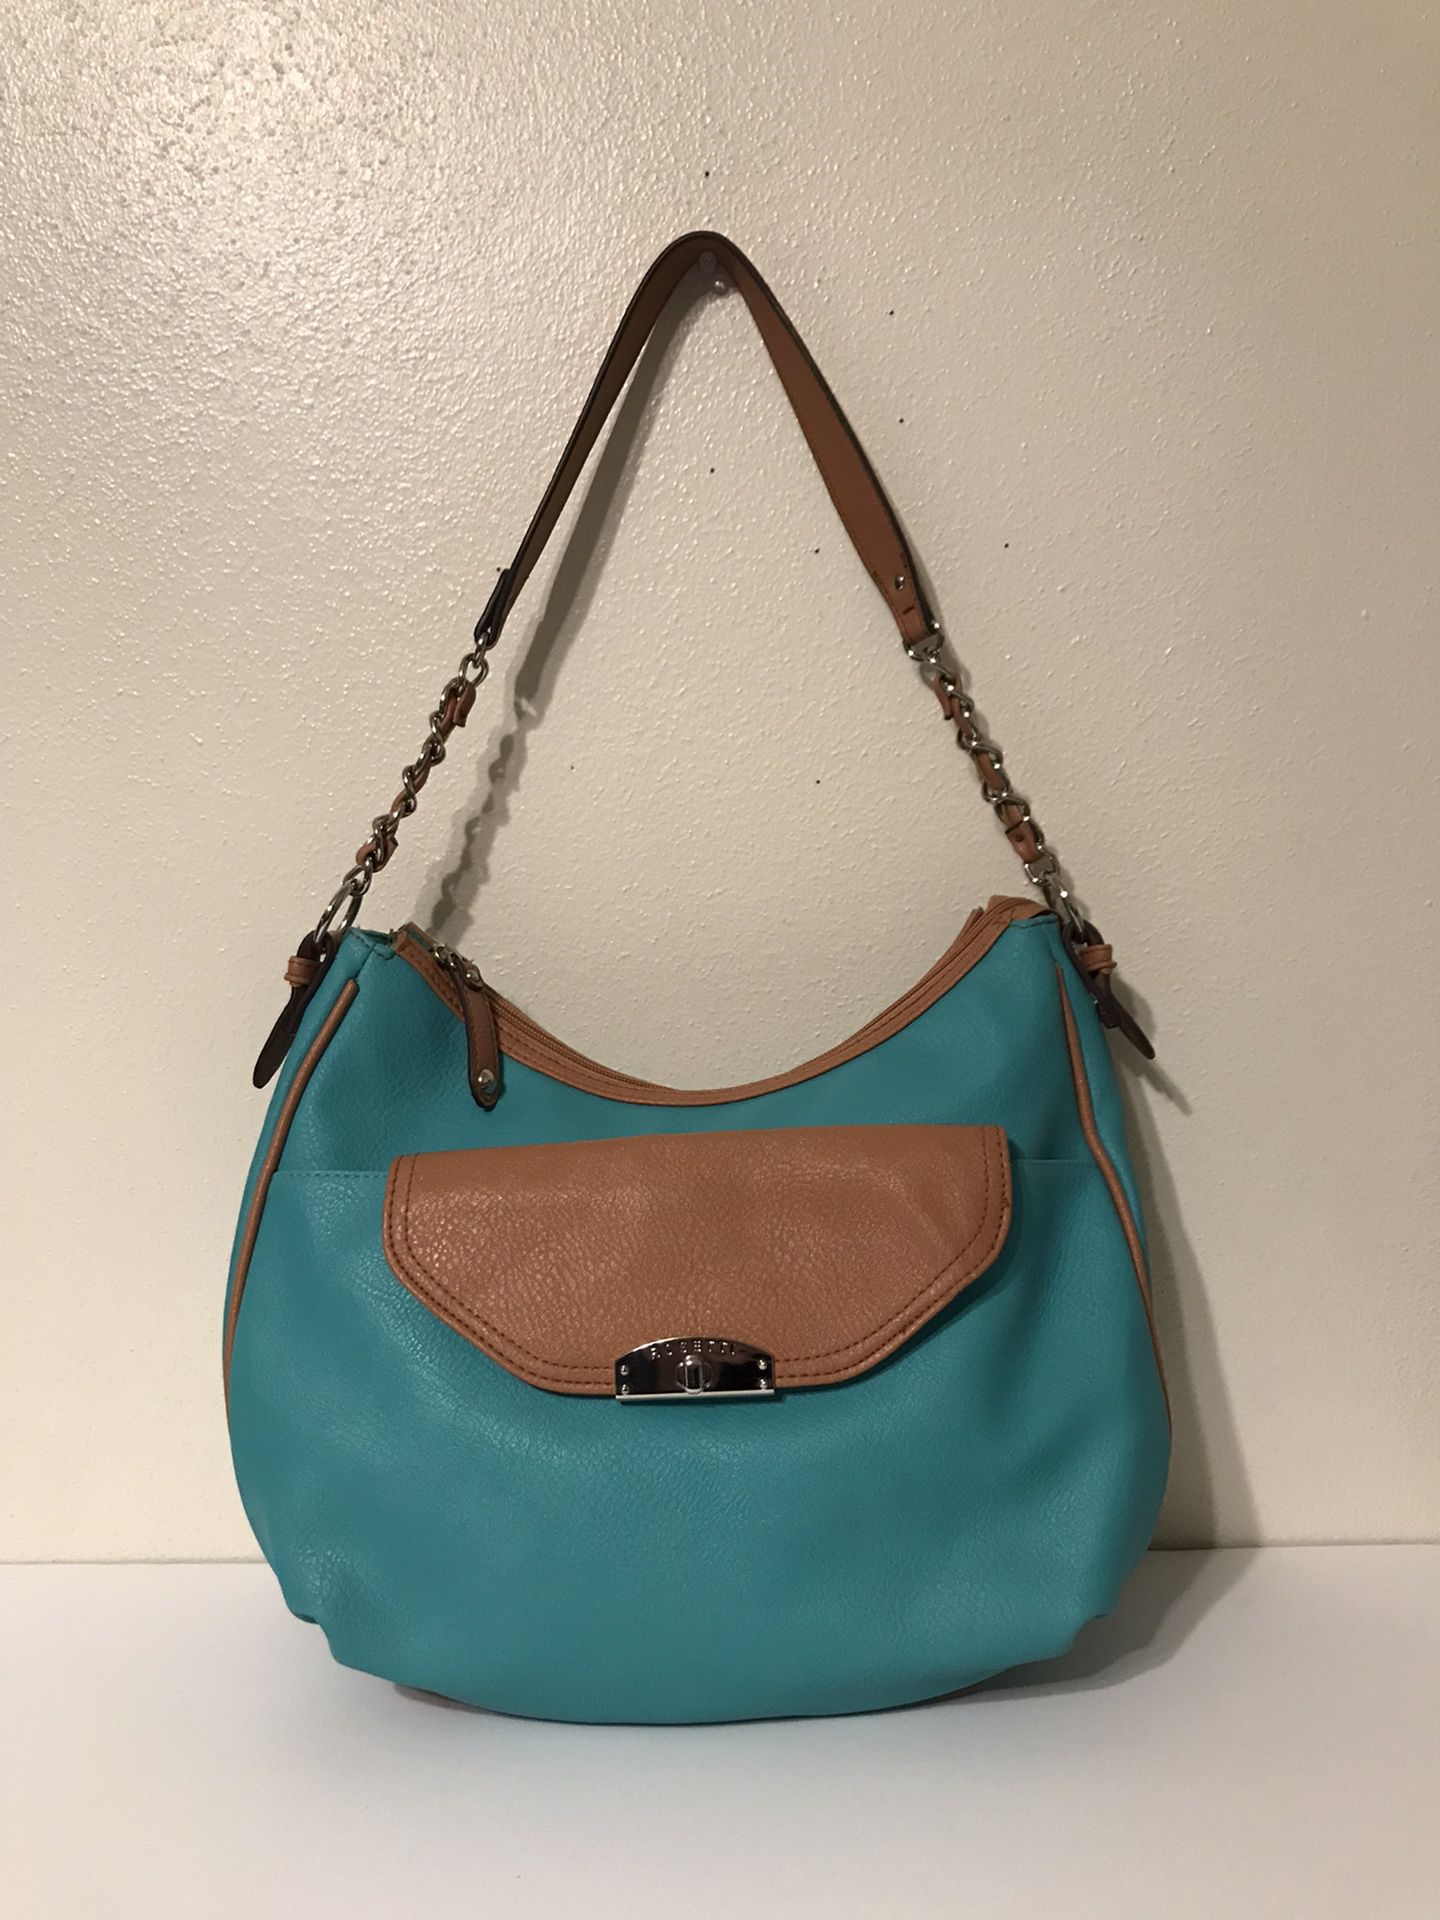 Rosetti Women’s Turquoise & Brown Faux Leather Purse Chain Strap Hobo Bag